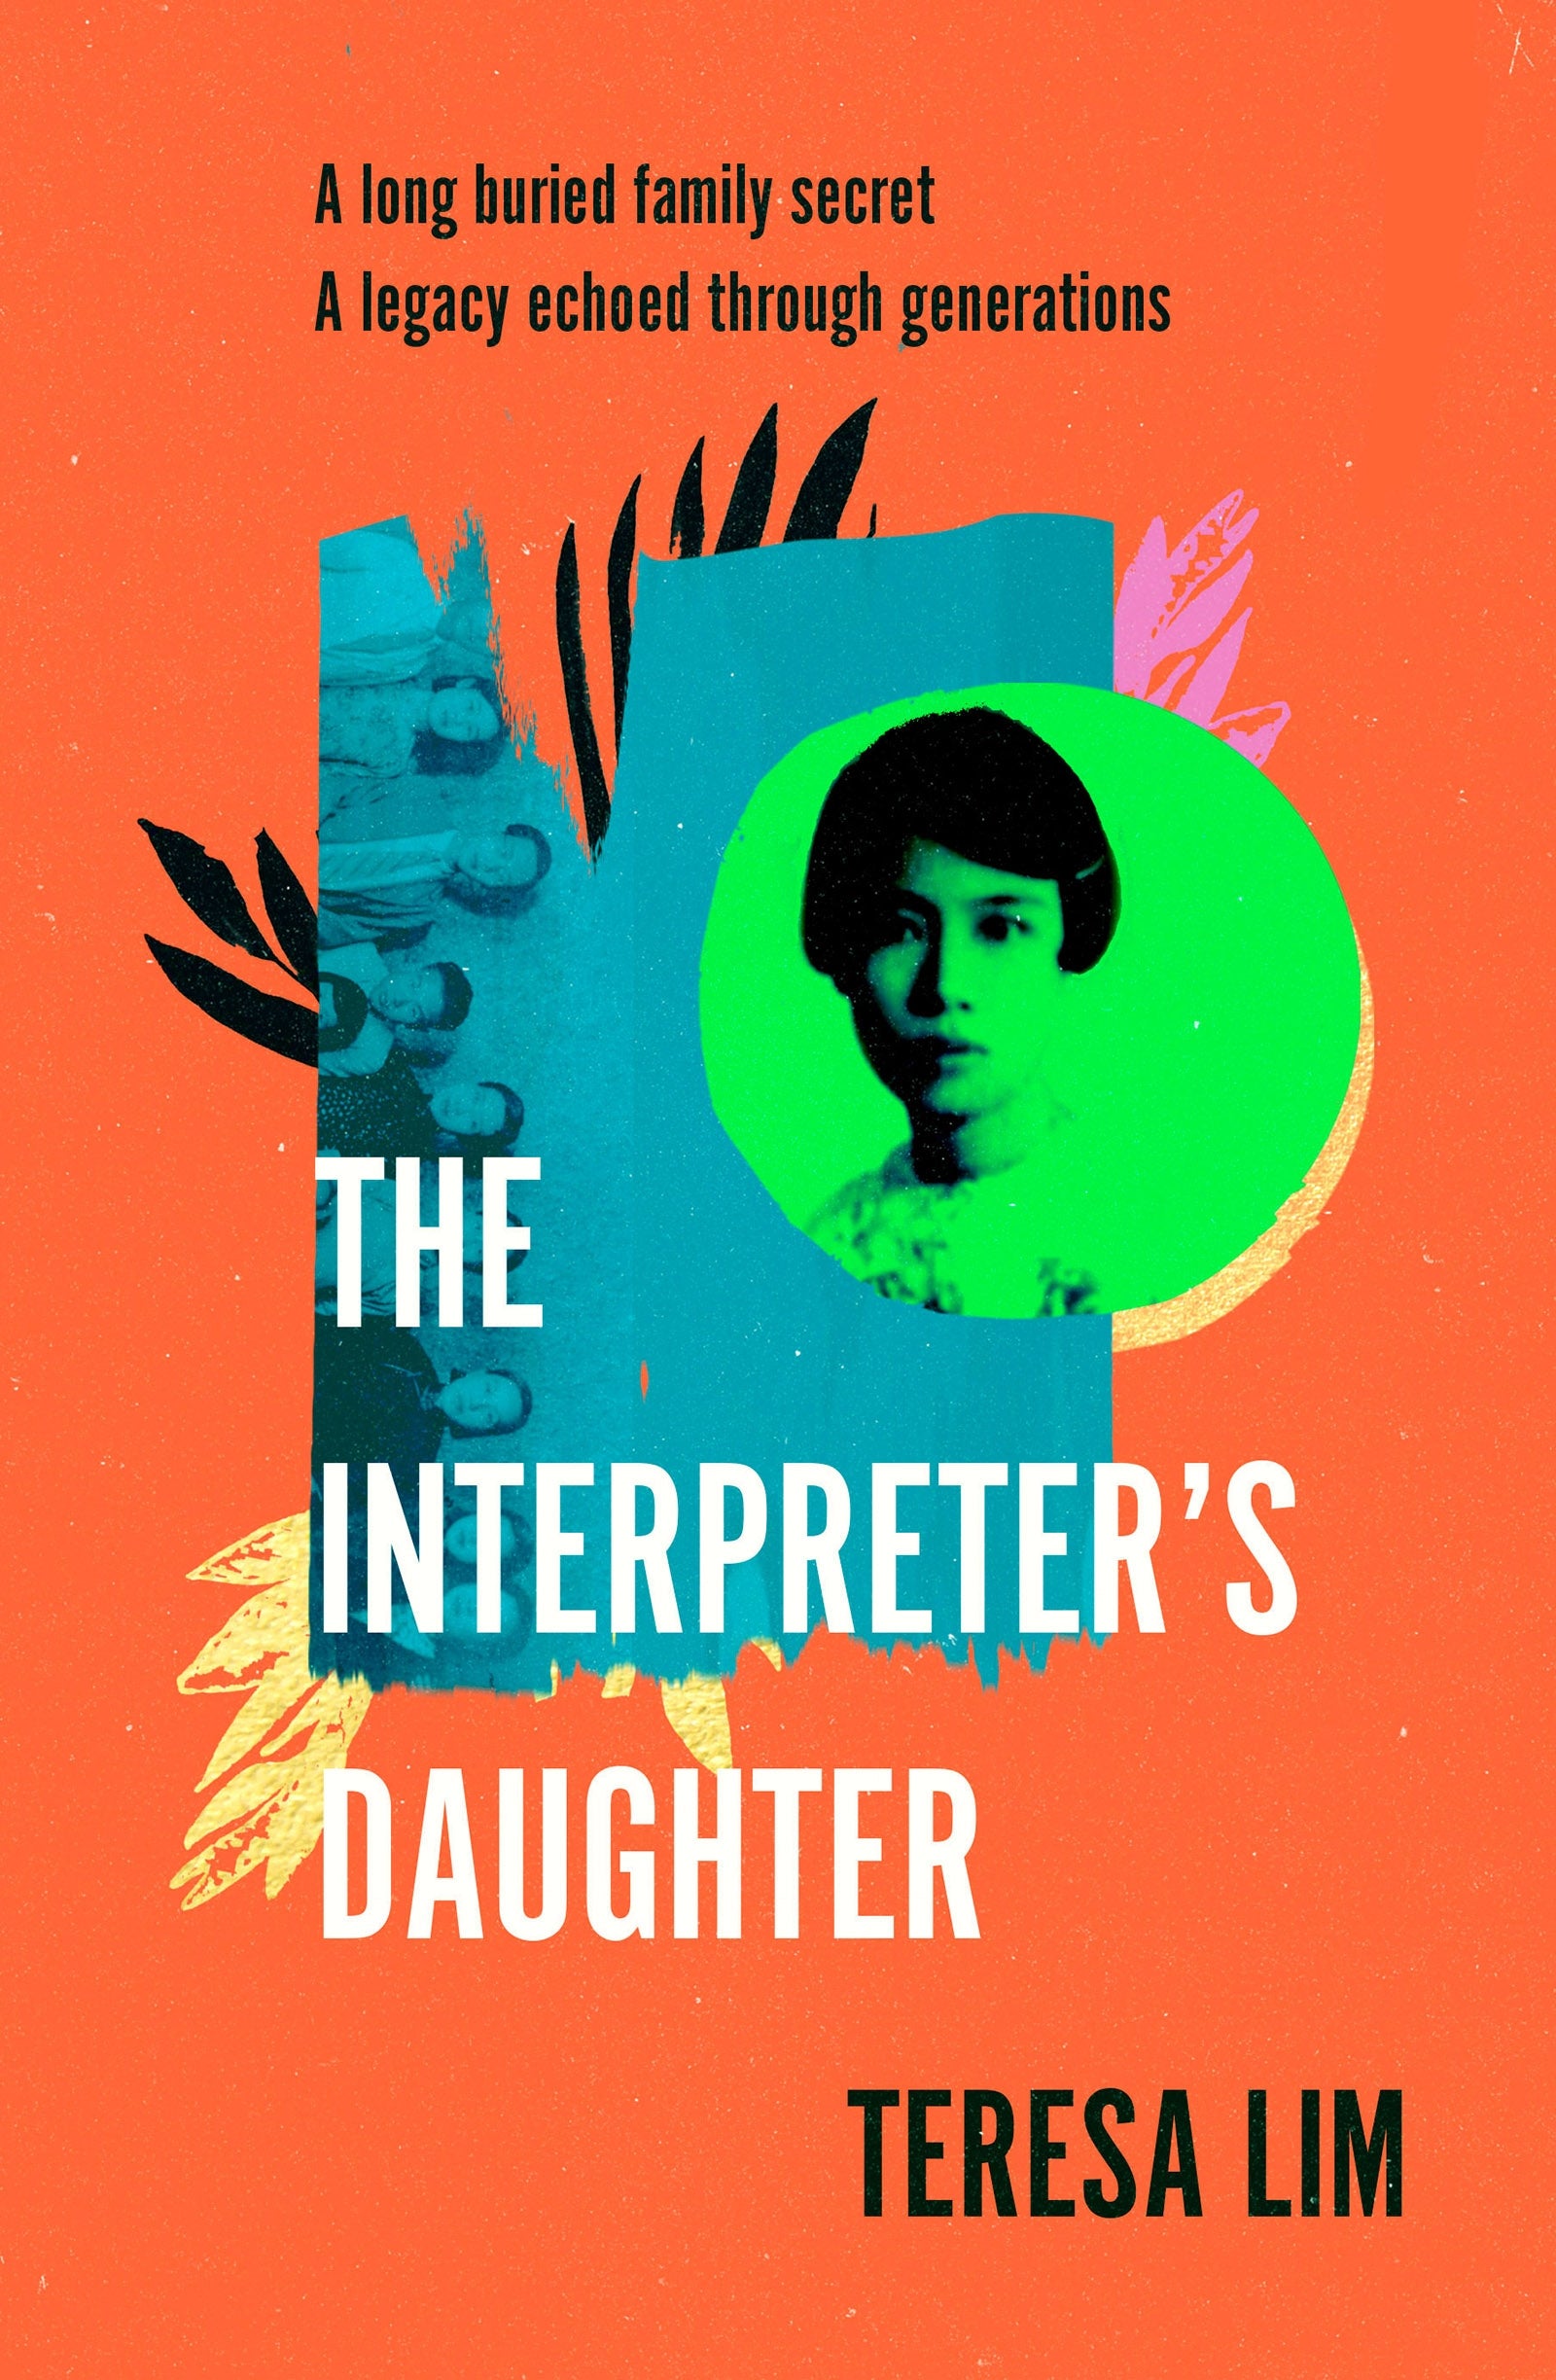 The Interpreter's Daughter: A remarkable true story of feminist defiance in 19th century Singapore